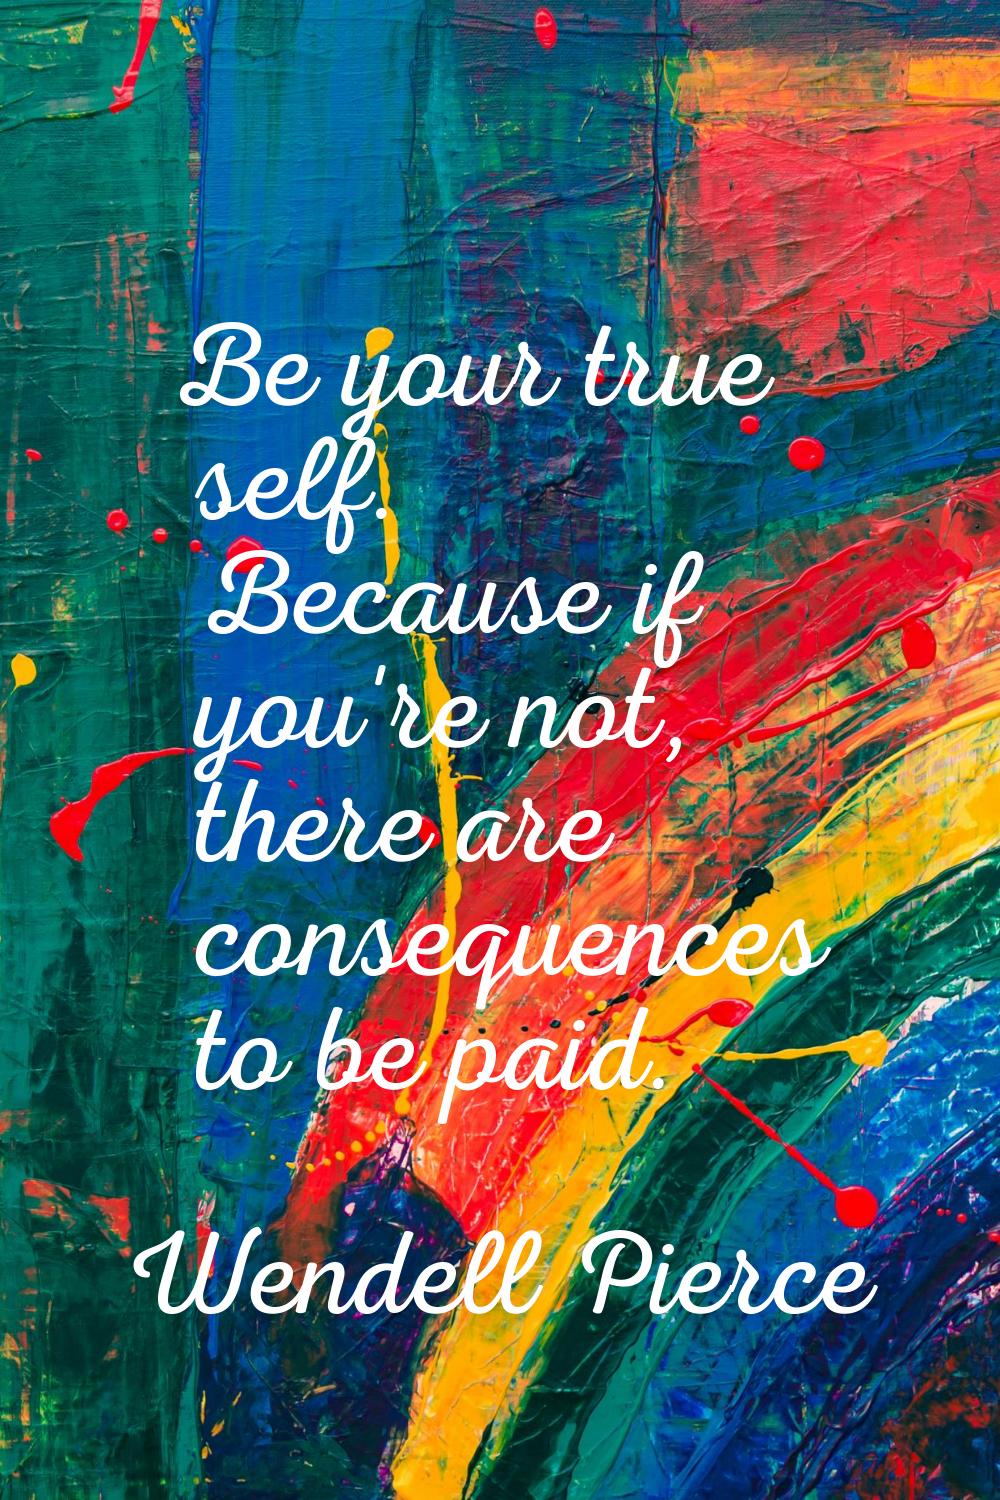 Be your true self. Because if you're not, there are consequences to be paid.